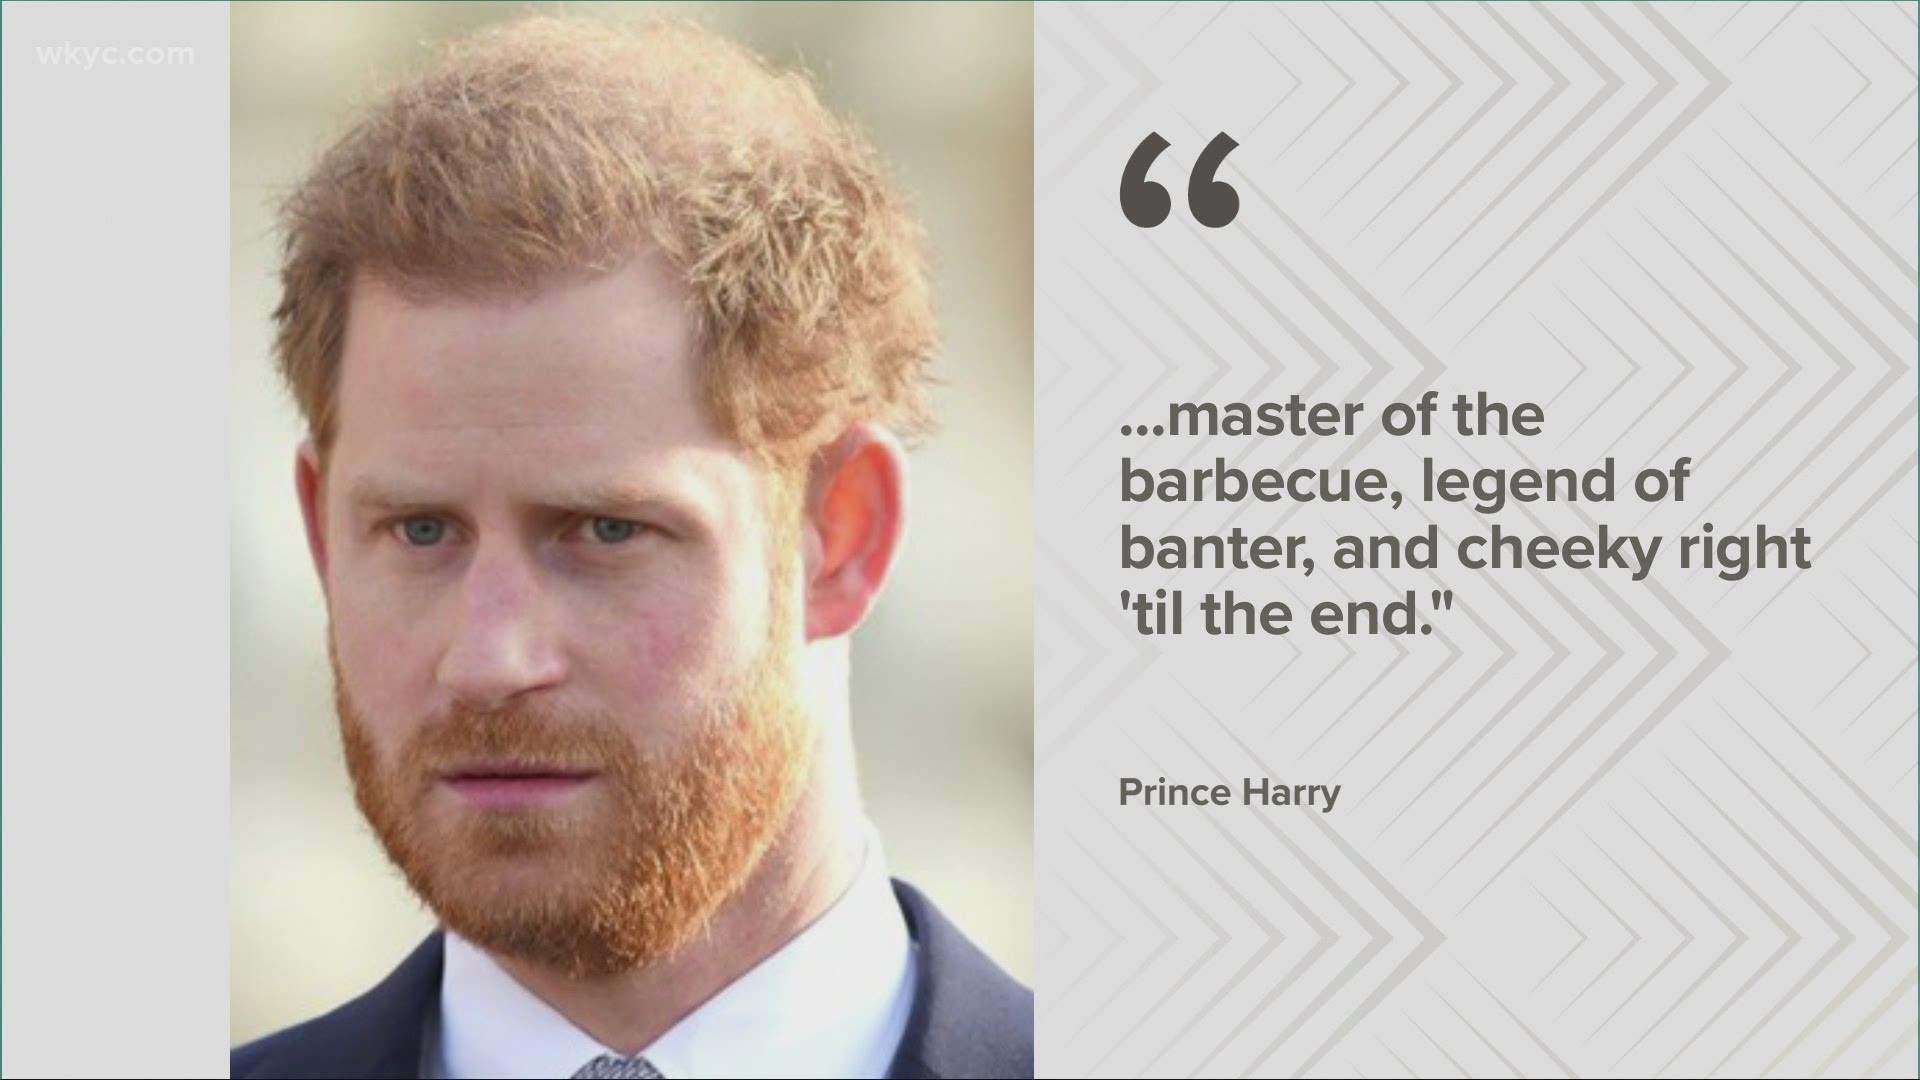 Prince Harry is back in the U.K. today for the upcoming funeral for his grandfather. Plus, what he had to say about his grandfather's death in a new statement.